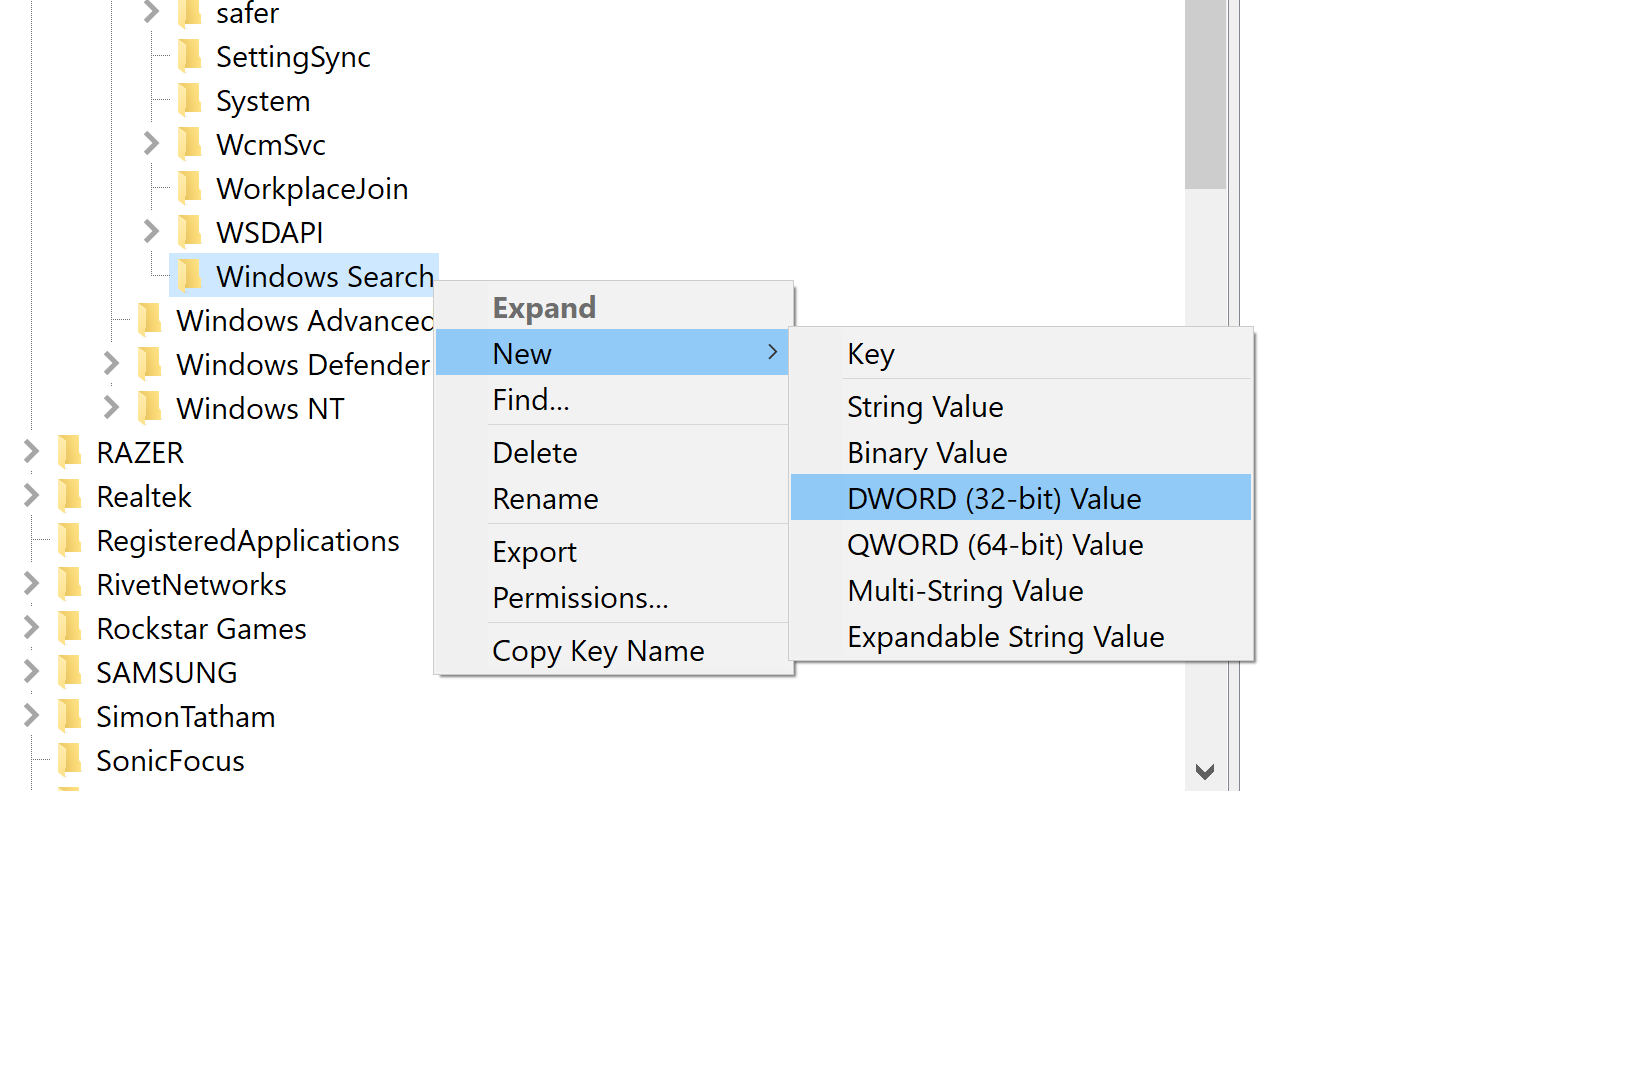 If the Windows Search key does not exist, right-click on Windows and select New > Key to create a new key. Name it Windows Search.
Right-click on the right pane, select New > DWORD (32-bit) Value, and name it AllowCortana.